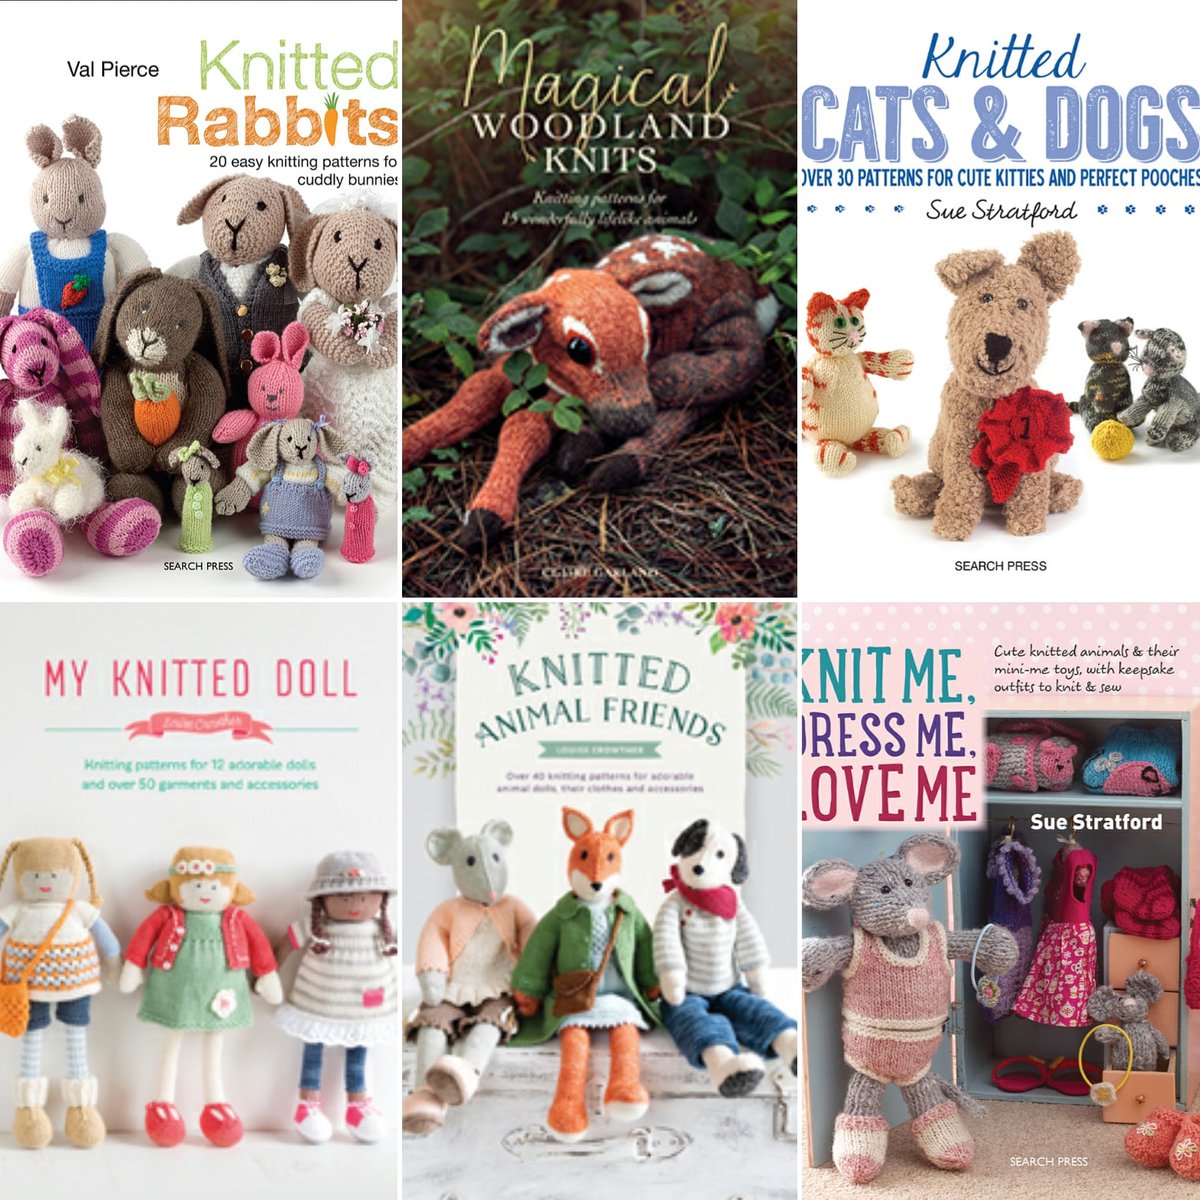 We have some fabulous knitted toy, animal, dolls books instock 😍
#thelostsheepwoolshop #knitbooks #knittingbook #knittingbooks #knitdoll #knitdolls #knittoys #knitteddolls #knittedanimals #lovebooks #lovebooks📚